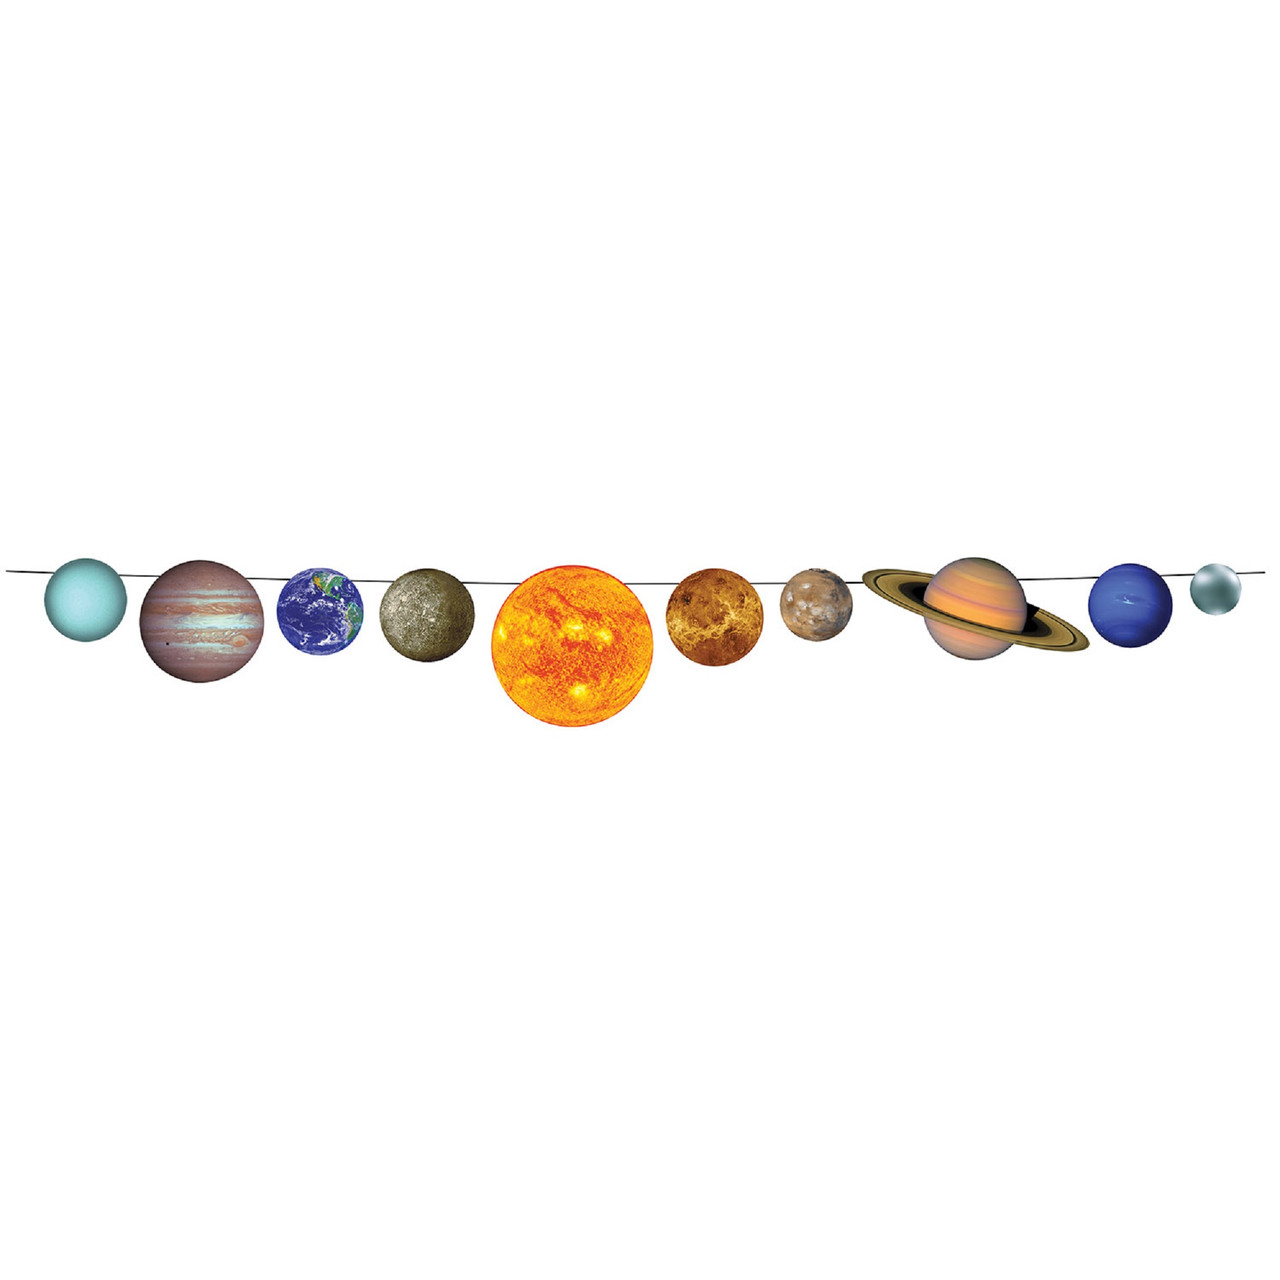 solar system 1 to 8